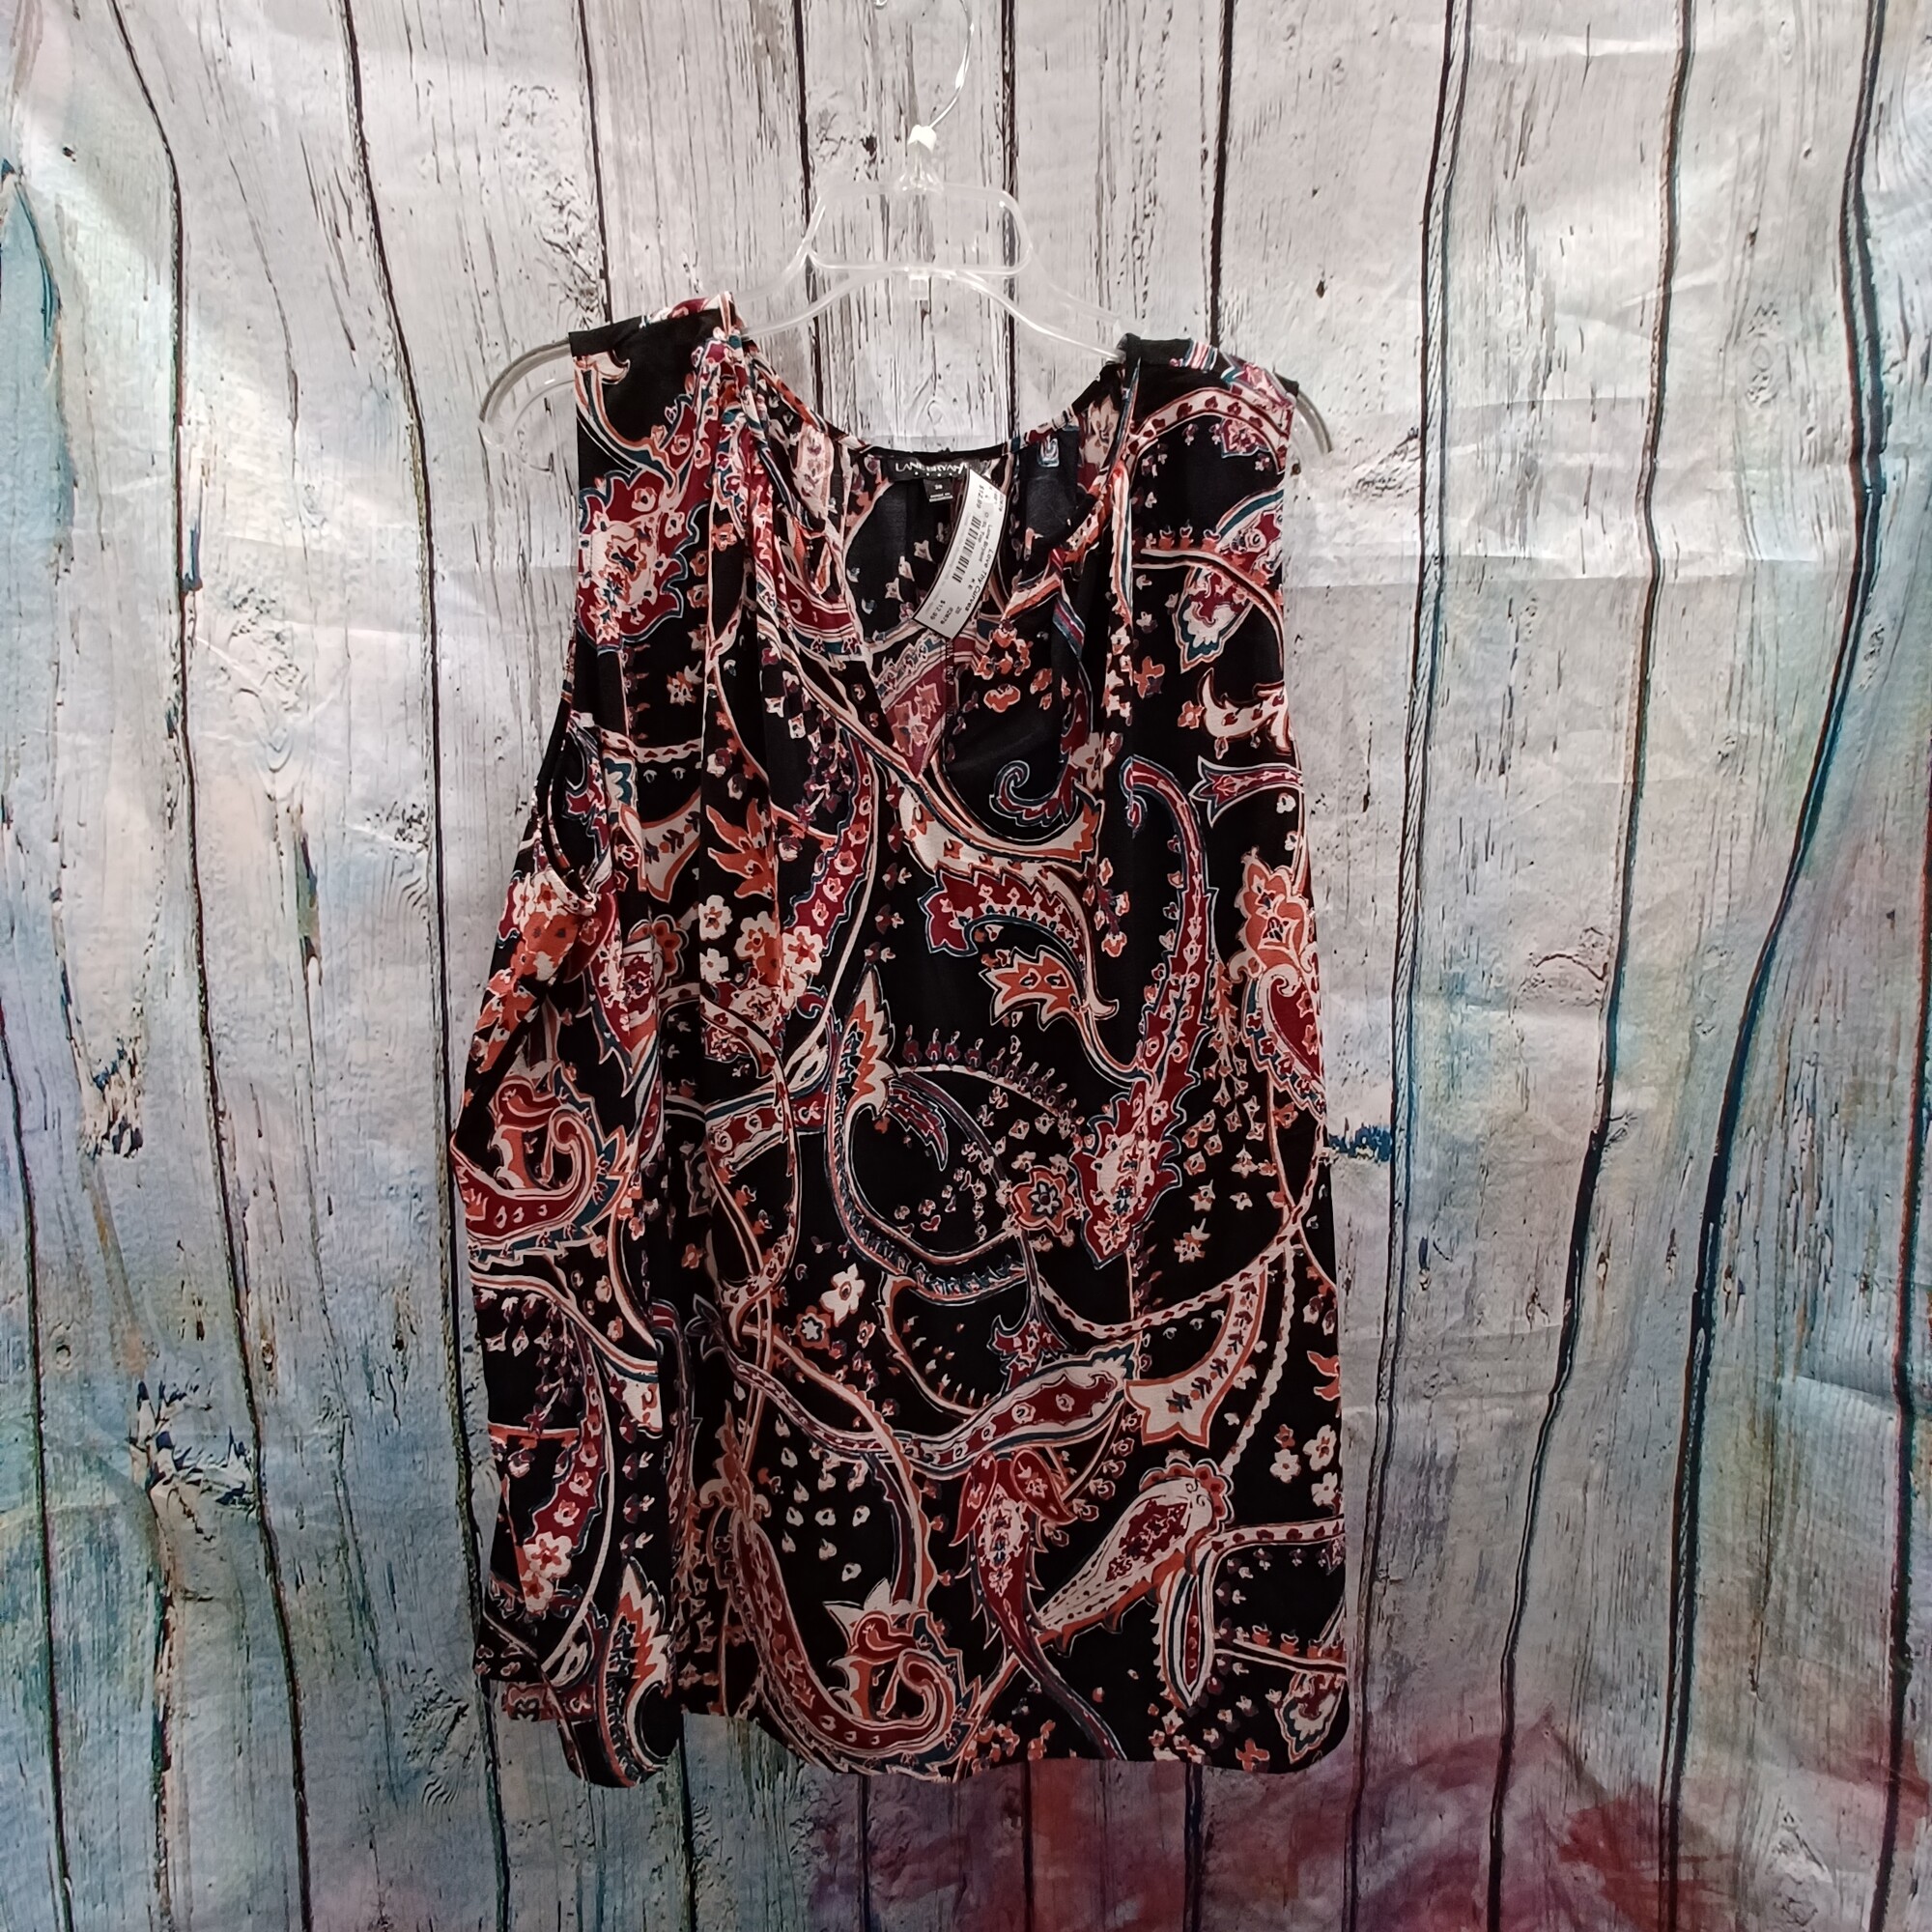 Black sleeveless top with pink, white and teal paisley print